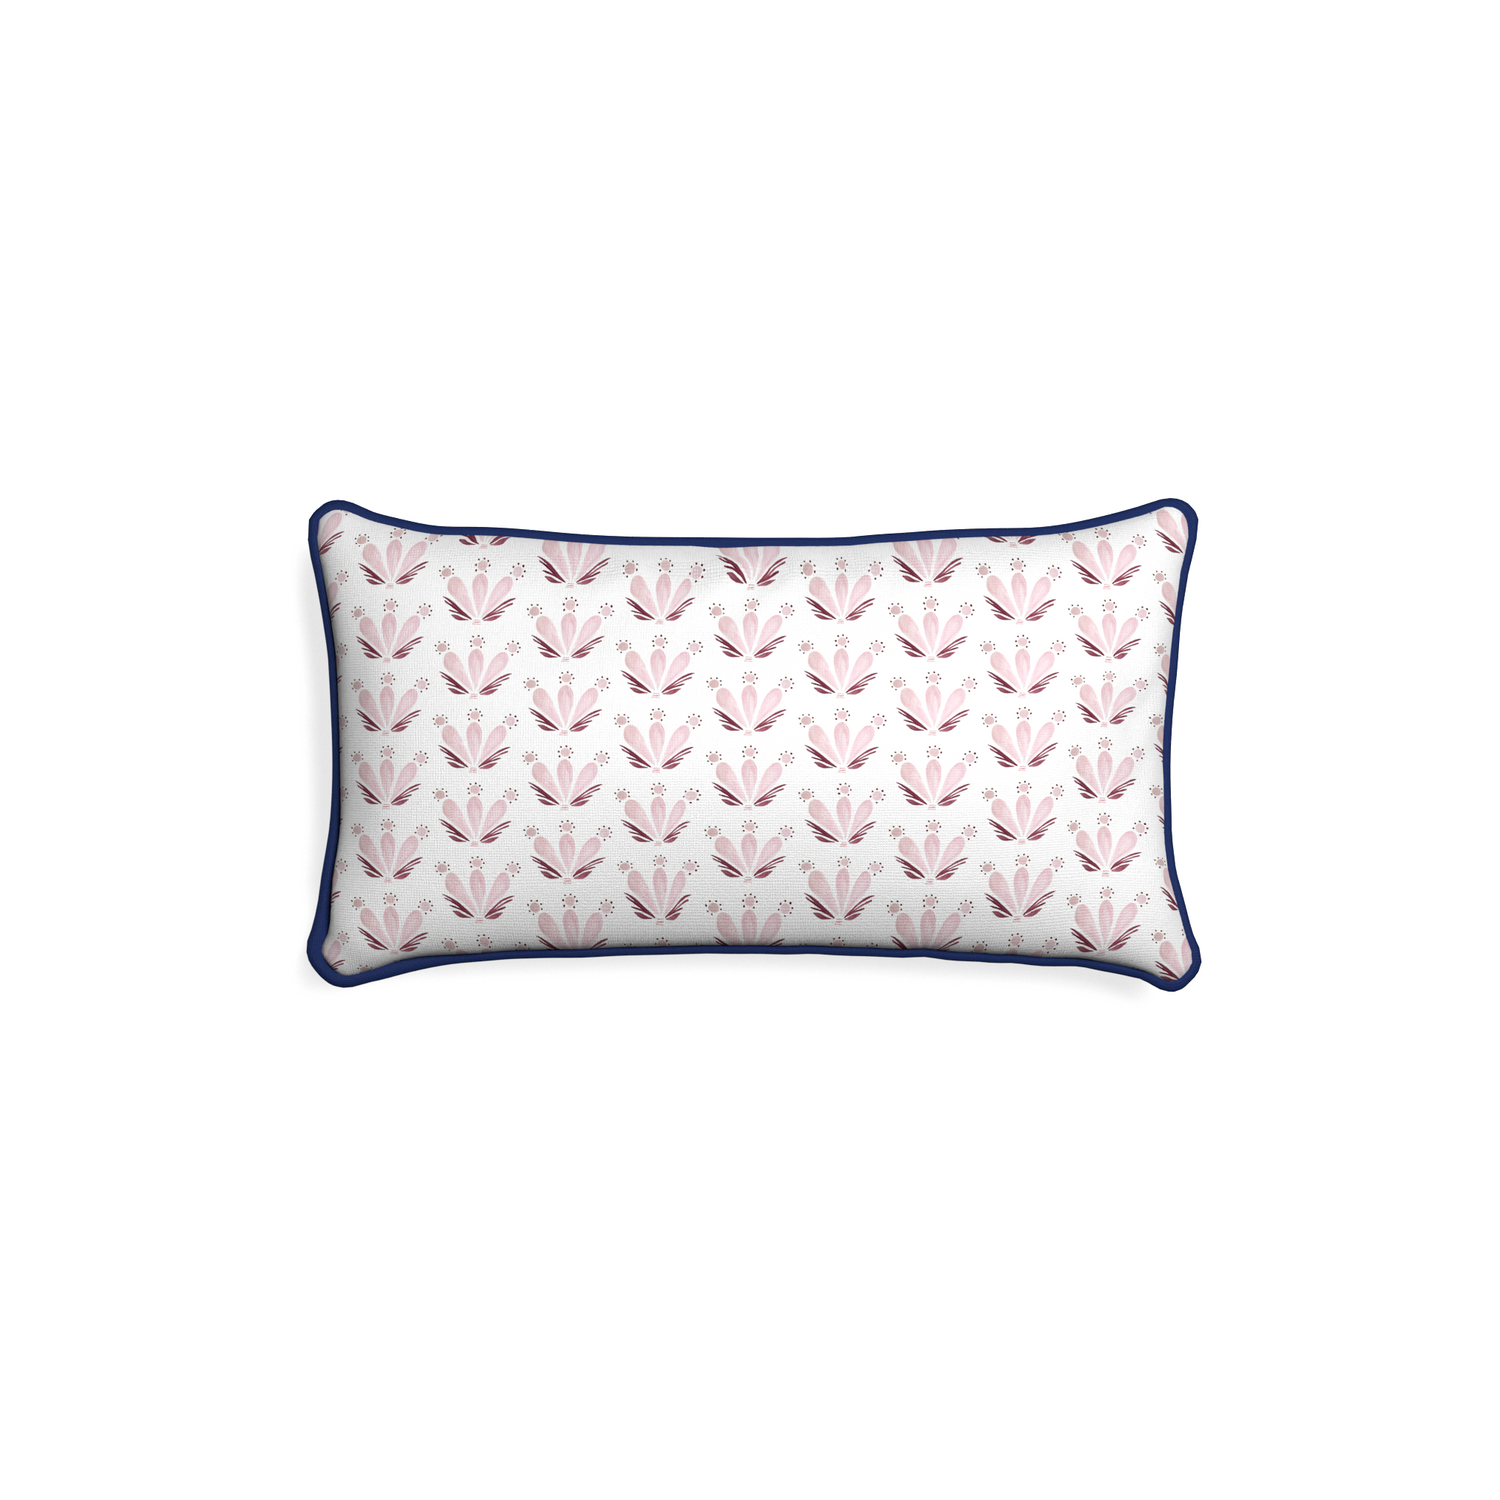 Petite-lumbar serena pink custom pink & burgundy drop repeat floralpillow with midnight piping on white background